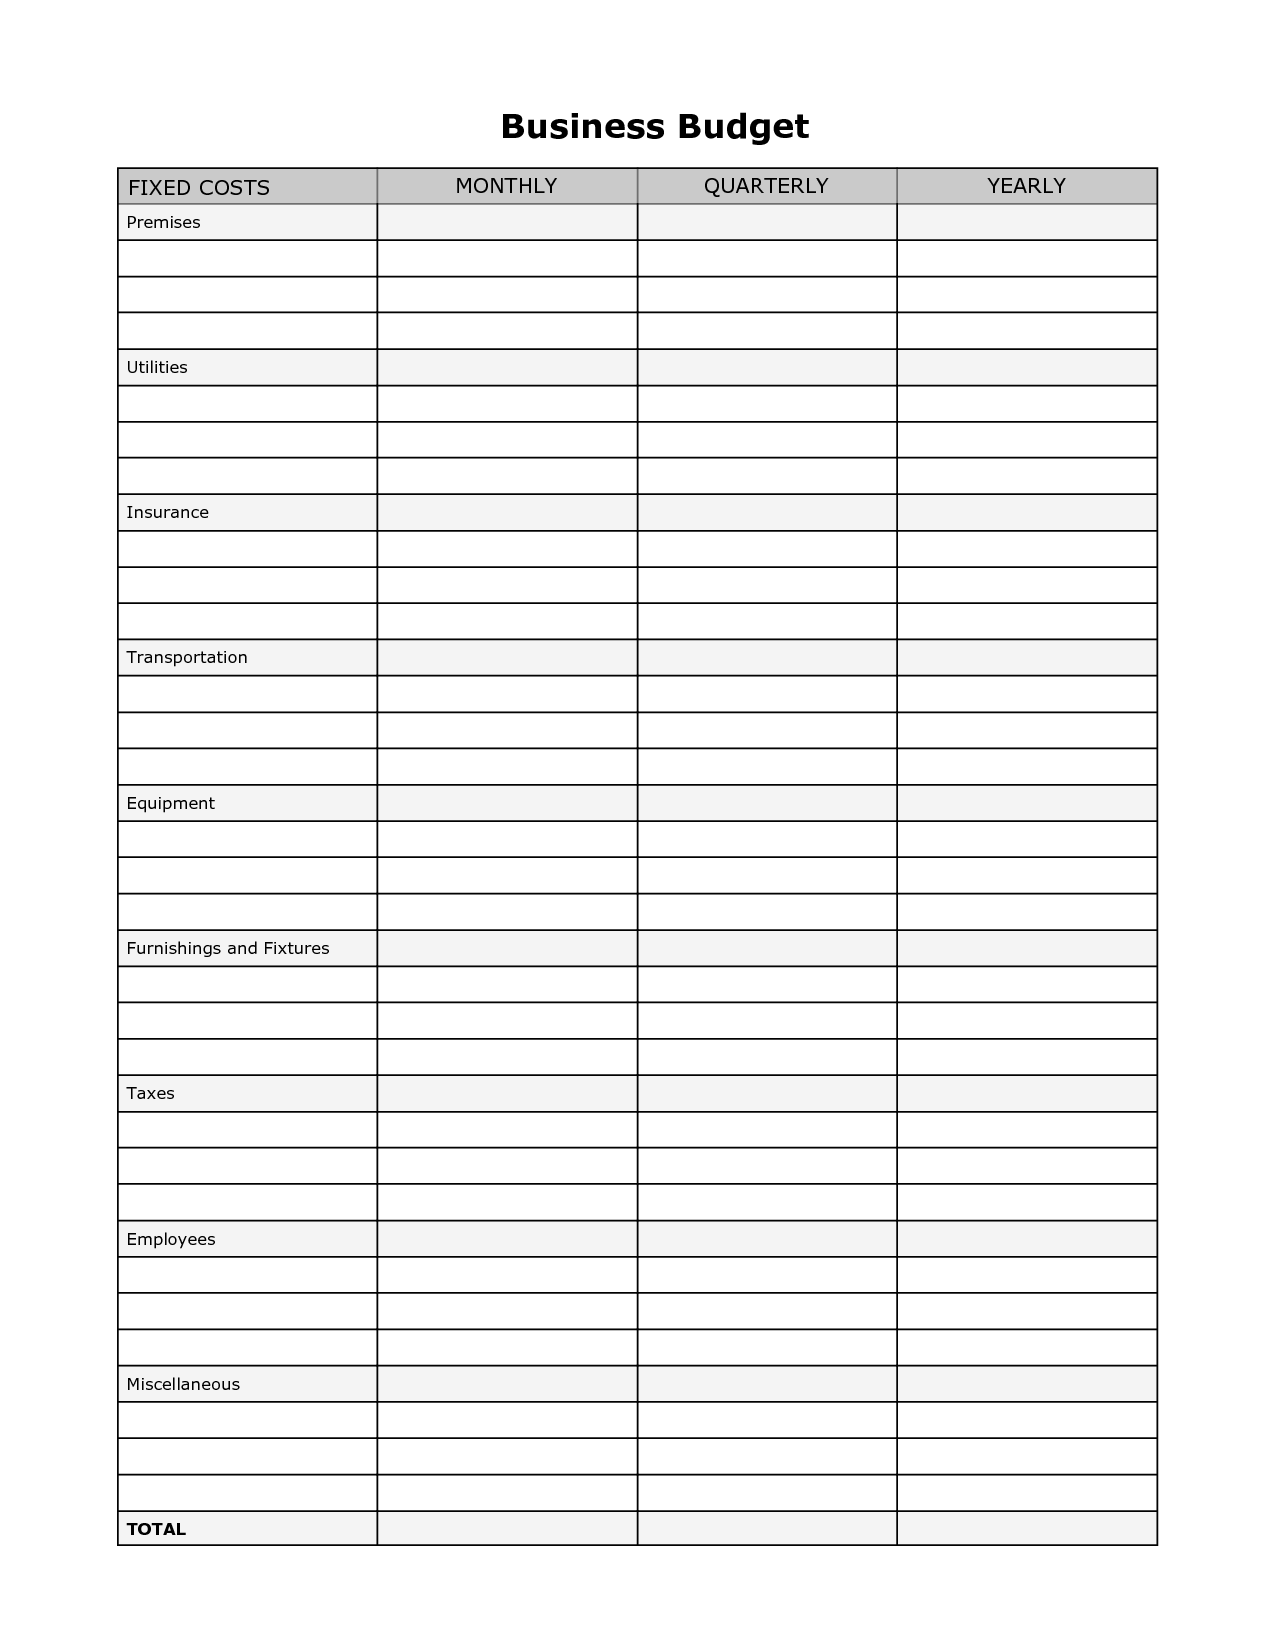 8 Best Images of Free Printable Business Expense Worksheets Free